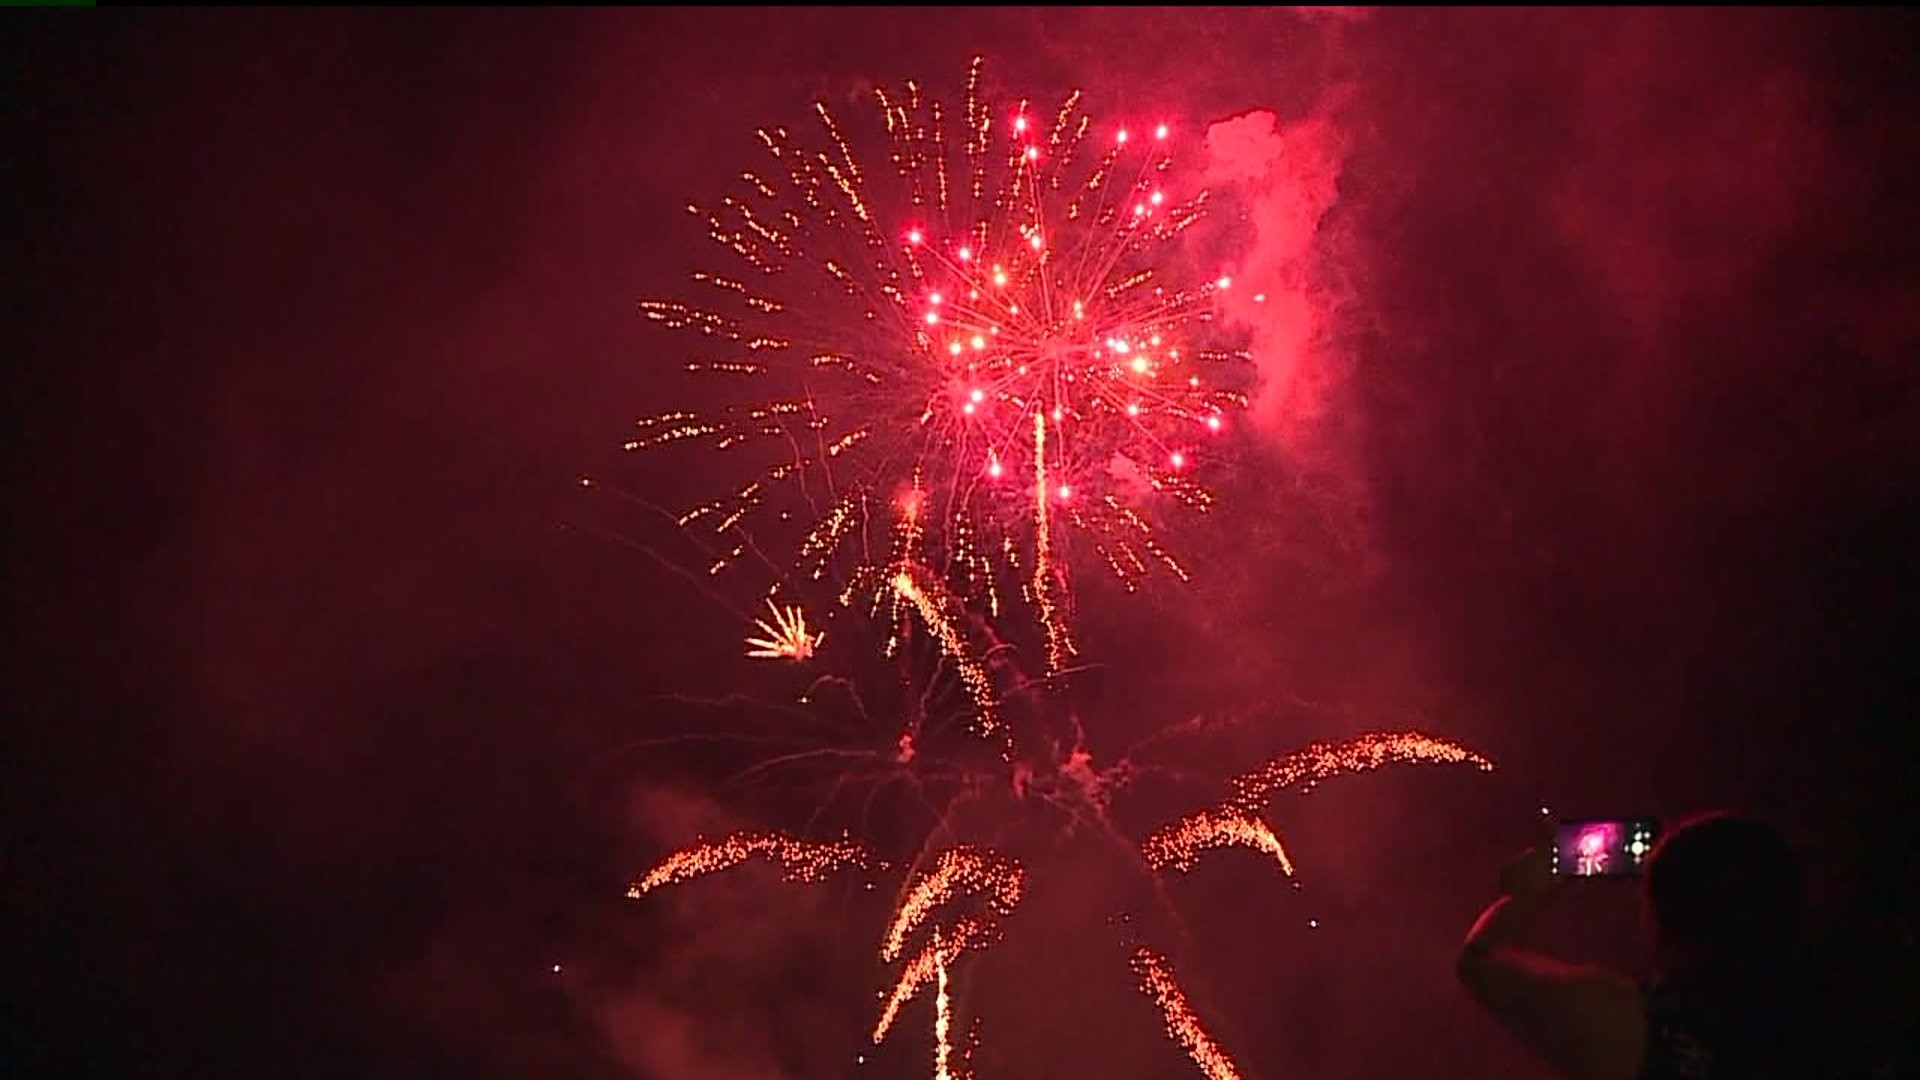 Fireworks Show Draws in Thousands to Kirby Park in WilkesBarre